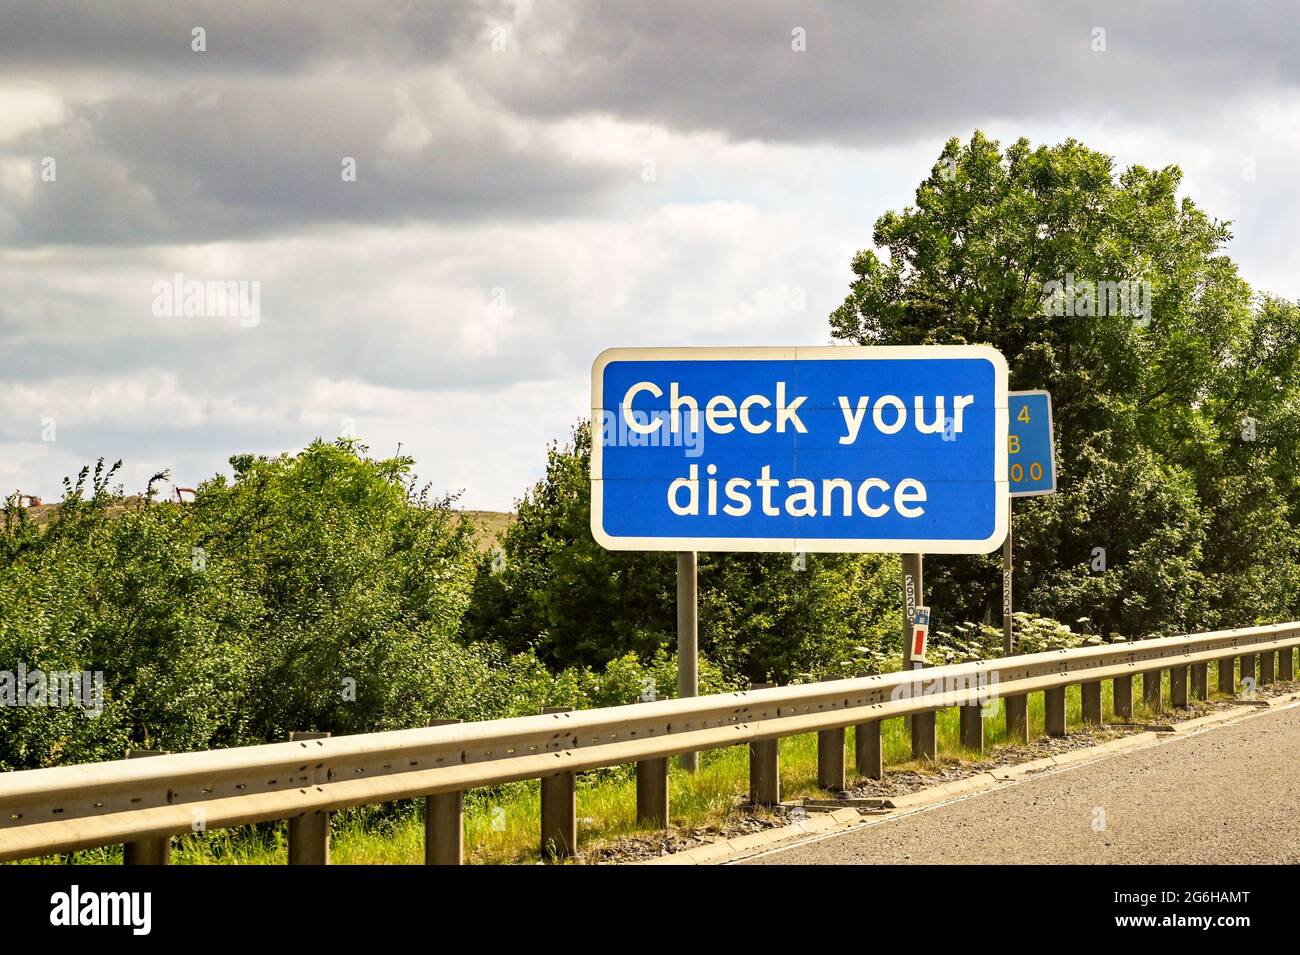 Safety sign on a motorway advising drivers to check the distance between vehicles Stock Photo